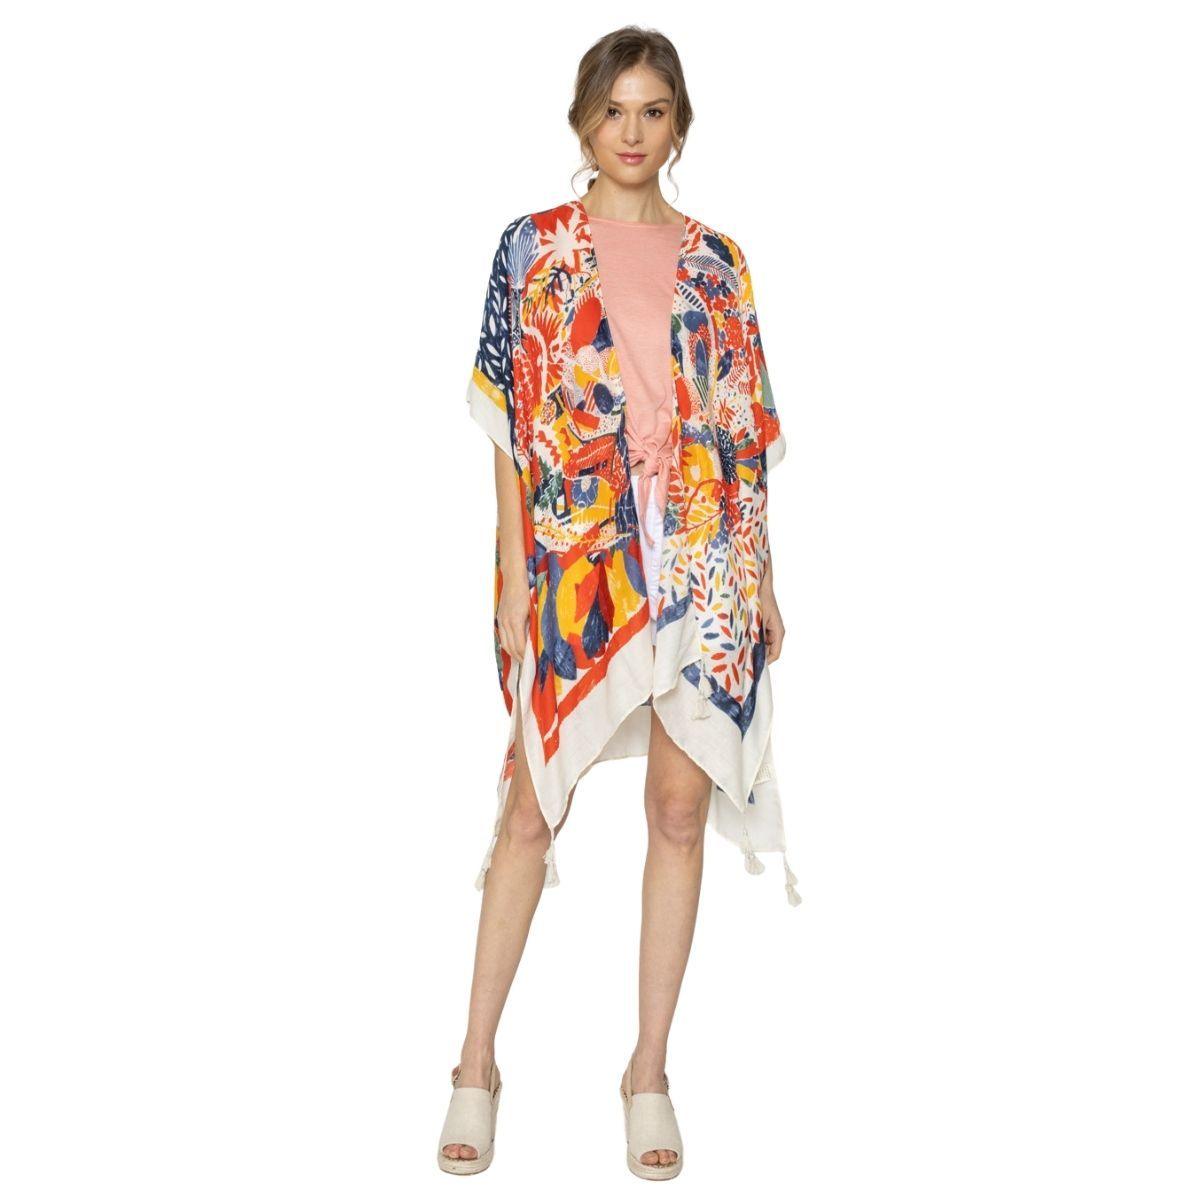 Upgrade Your Style with Our Vibrant Multicolor Bold Print Kimono Coverup Top